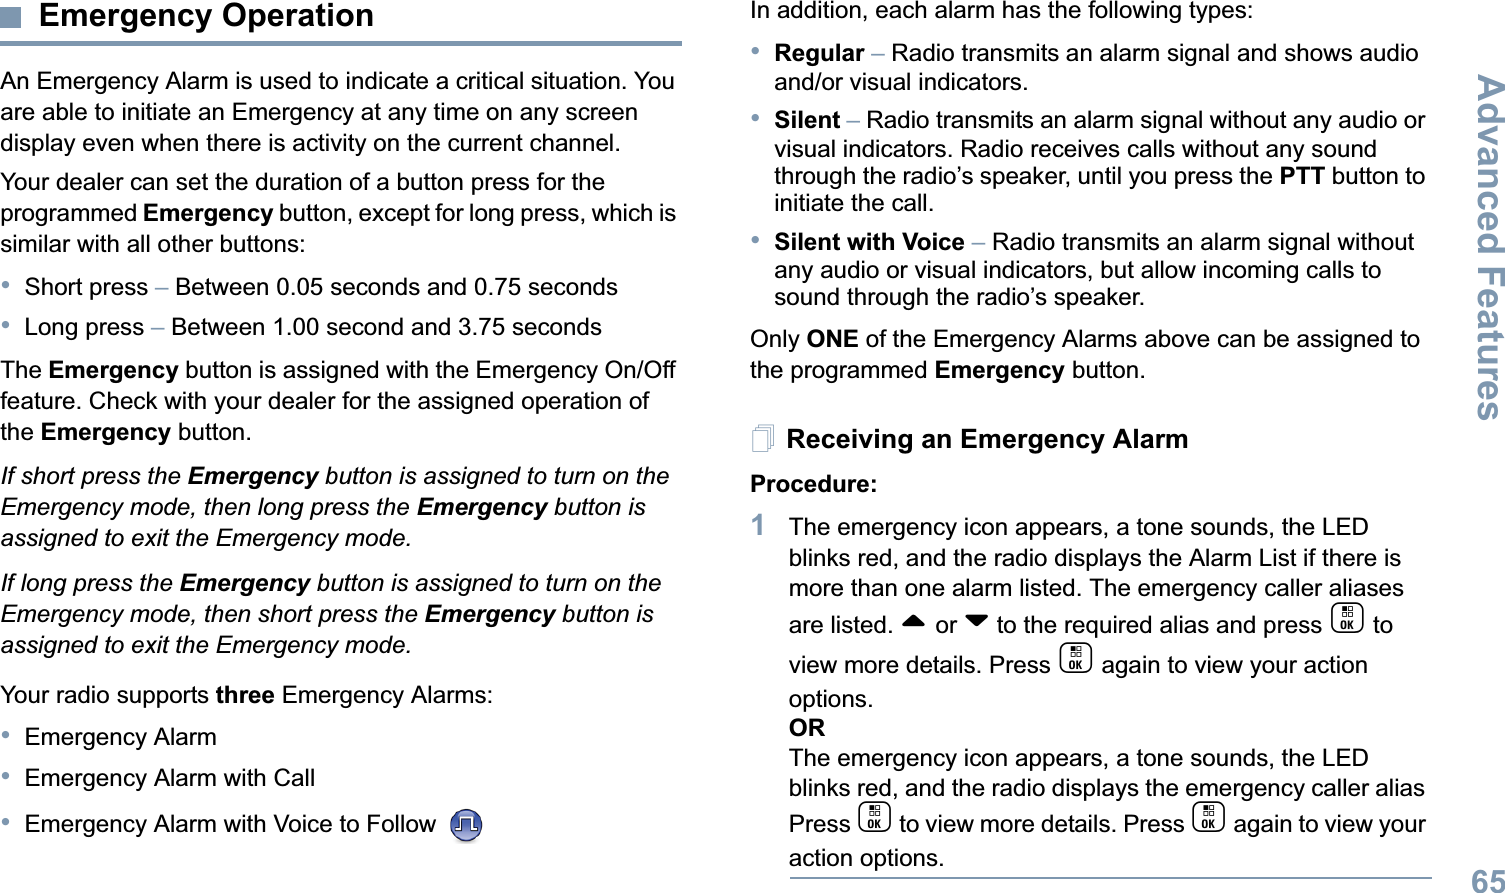 Advanced FeaturesEnglish65Emergency OperationAn Emergency Alarm is used to indicate a critical situation. You are able to initiate an Emergency at any time on any screen display even when there is activity on the current channel.Your dealer can set the duration of a button press for the programmed Emergency button, except for long press, which is similar with all other buttons:•Short press – Between 0.05 seconds and 0.75 seconds•Long press – Between 1.00 second and 3.75 secondsThe Emergency button is assigned with the Emergency On/Off feature. Check with your dealer for the assigned operation of the Emergency button.If short press the Emergency button is assigned to turn on the Emergency mode, then long press the Emergency button is assigned to exit the Emergency mode.If long press the Emergency button is assigned to turn on the Emergency mode, then short press the Emergency button is assigned to exit the Emergency mode.Your radio supports three Emergency Alarms:•Emergency Alarm•Emergency Alarm with Call•Emergency Alarm with Voice to Follow In addition, each alarm has the following types:•Regular – Radio transmits an alarm signal and shows audio and/or visual indicators.•Silent – Radio transmits an alarm signal without any audio or visual indicators. Radio receives calls without any sound through the radio’s speaker, until you press the PTT button to initiate the call.•Silent with Voice – Radio transmits an alarm signal without any audio or visual indicators, but allow incoming calls to sound through the radio’s speaker.Only ONE of the Emergency Alarms above can be assigned to the programmed Emergency button.Receiving an Emergency AlarmProcedure:1The emergency icon appears, a tone sounds, the LED blinks red, and the radio displays the Alarm List if there is more than one alarm listed. The emergency caller aliases are listed. ^ or v to the required alias and press c to view more details. Press c again to view your action options.ORThe emergency icon appears, a tone sounds, the LED blinks red, and the radio displays the emergency caller alias Press c to view more details. Press c again to view your action options.